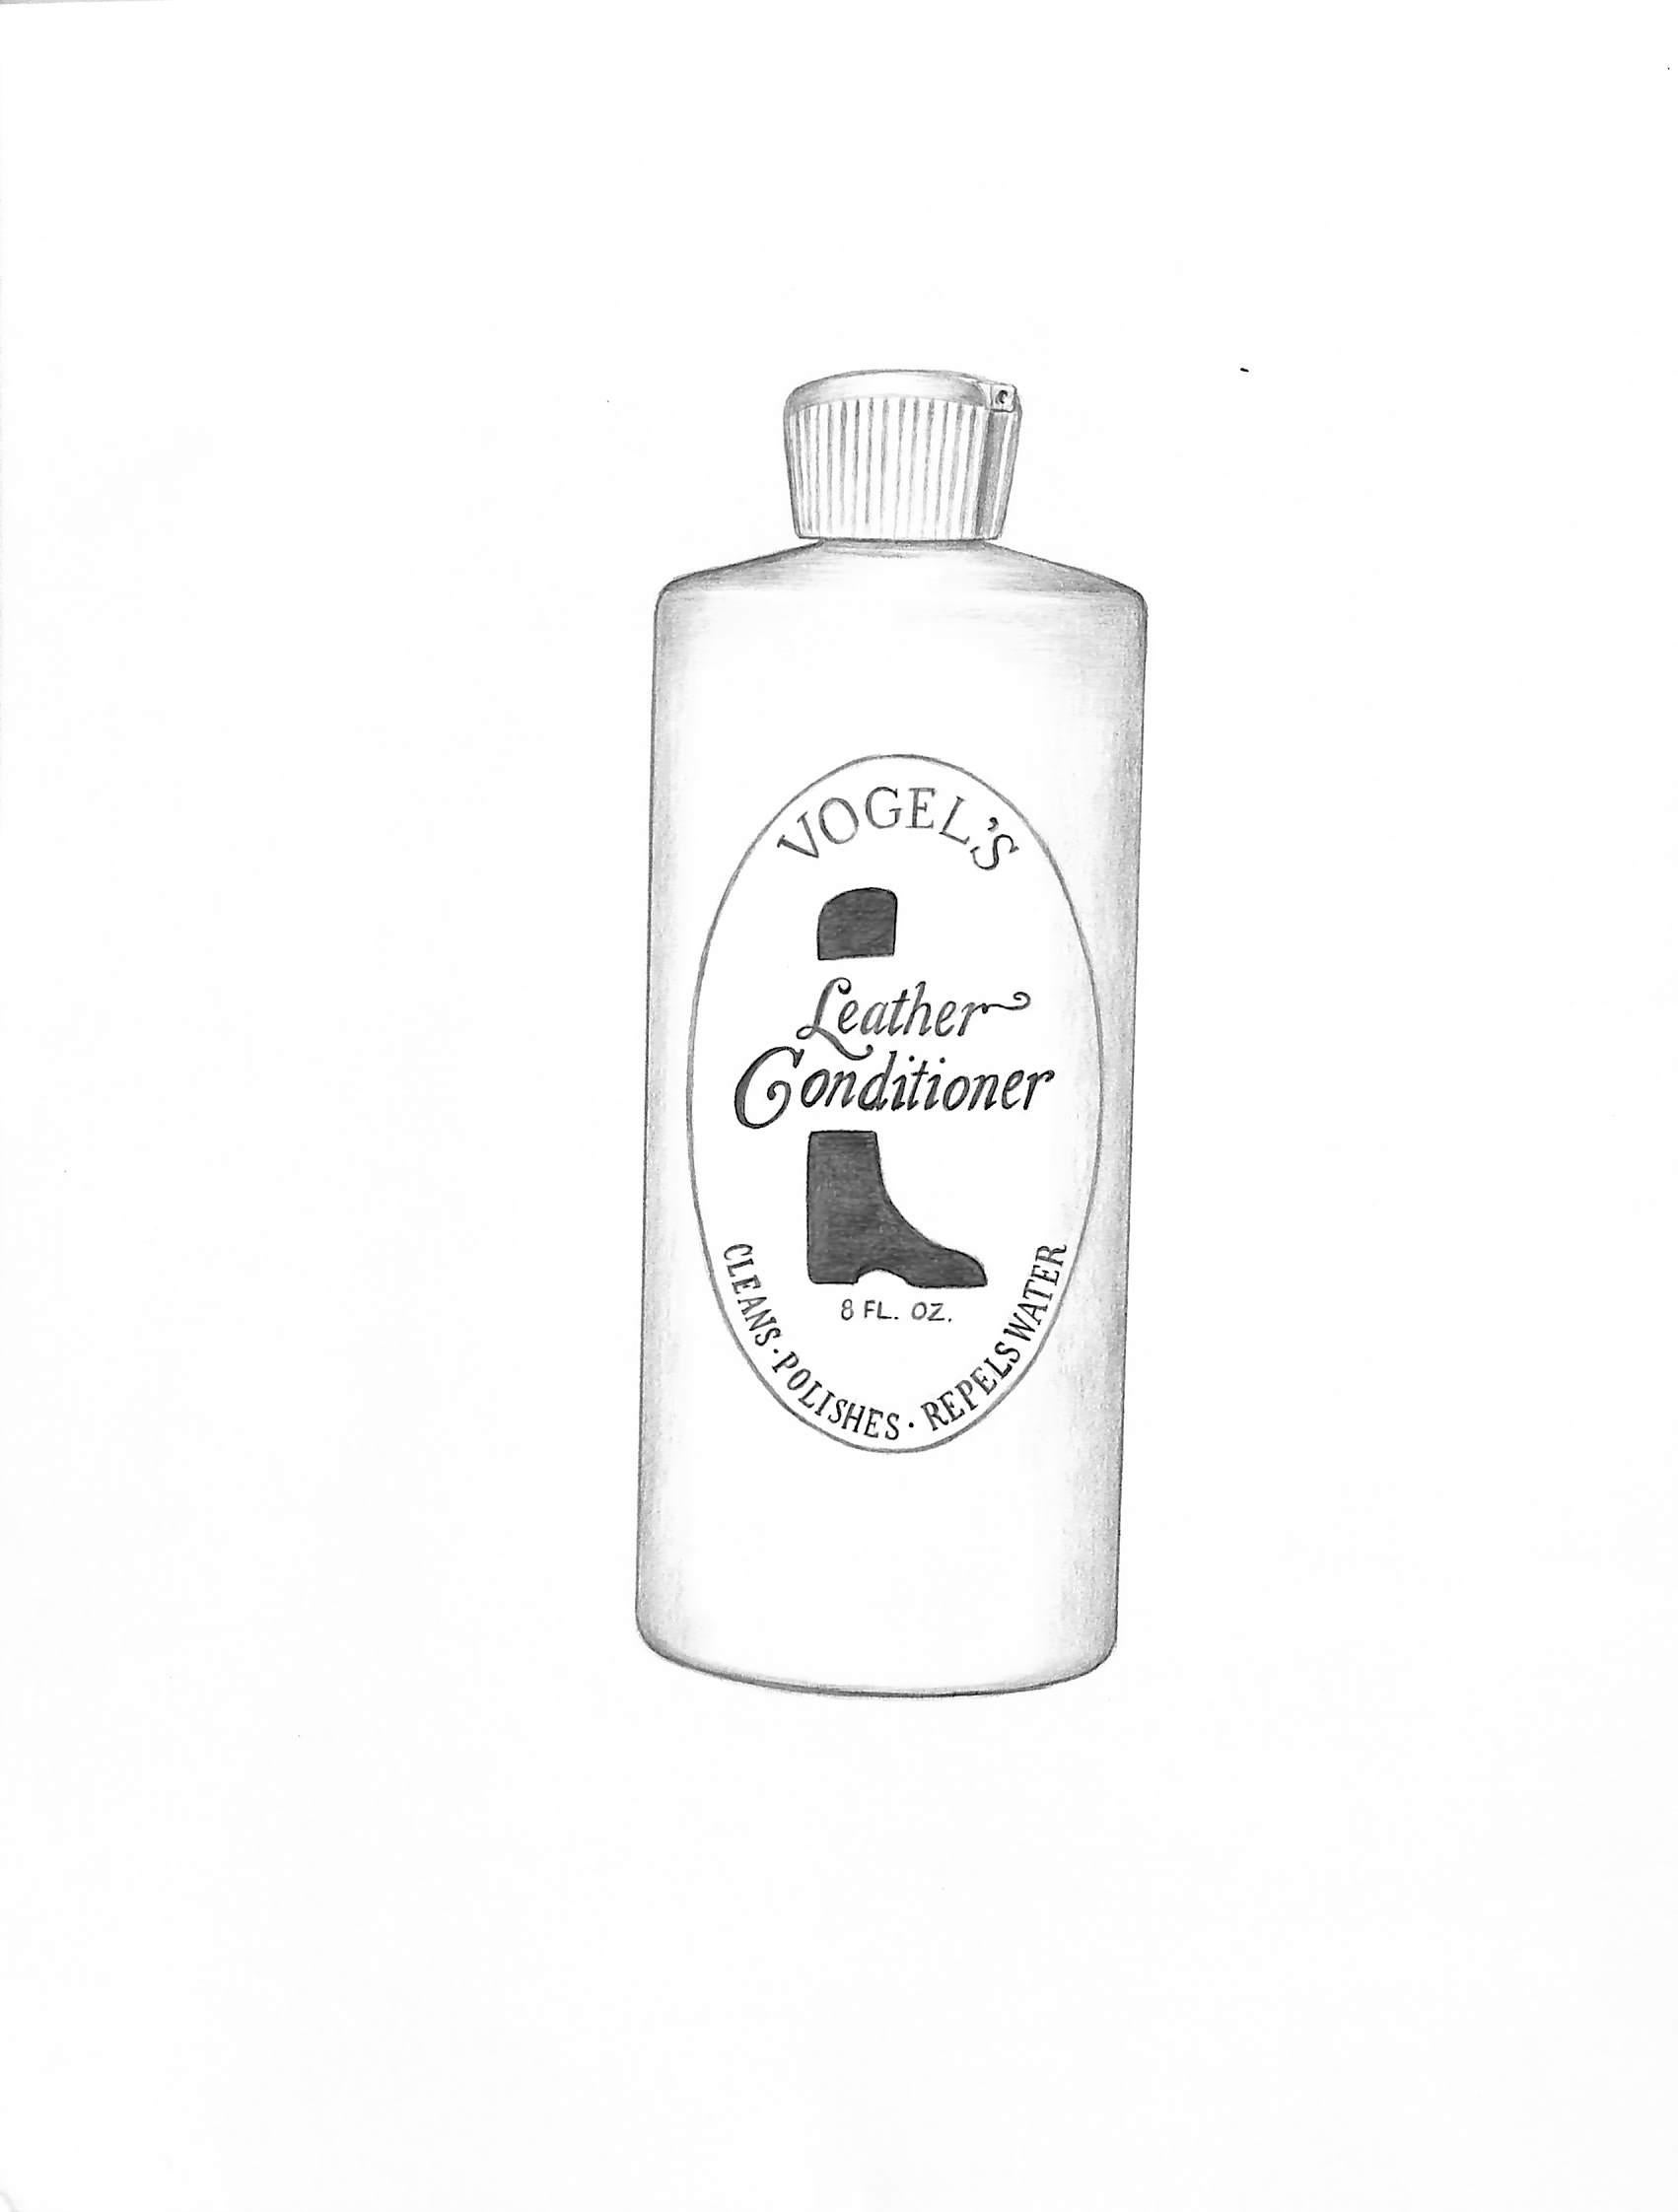 Vogel's Leather Conditioner Graphite Drawing - Art by Unknown